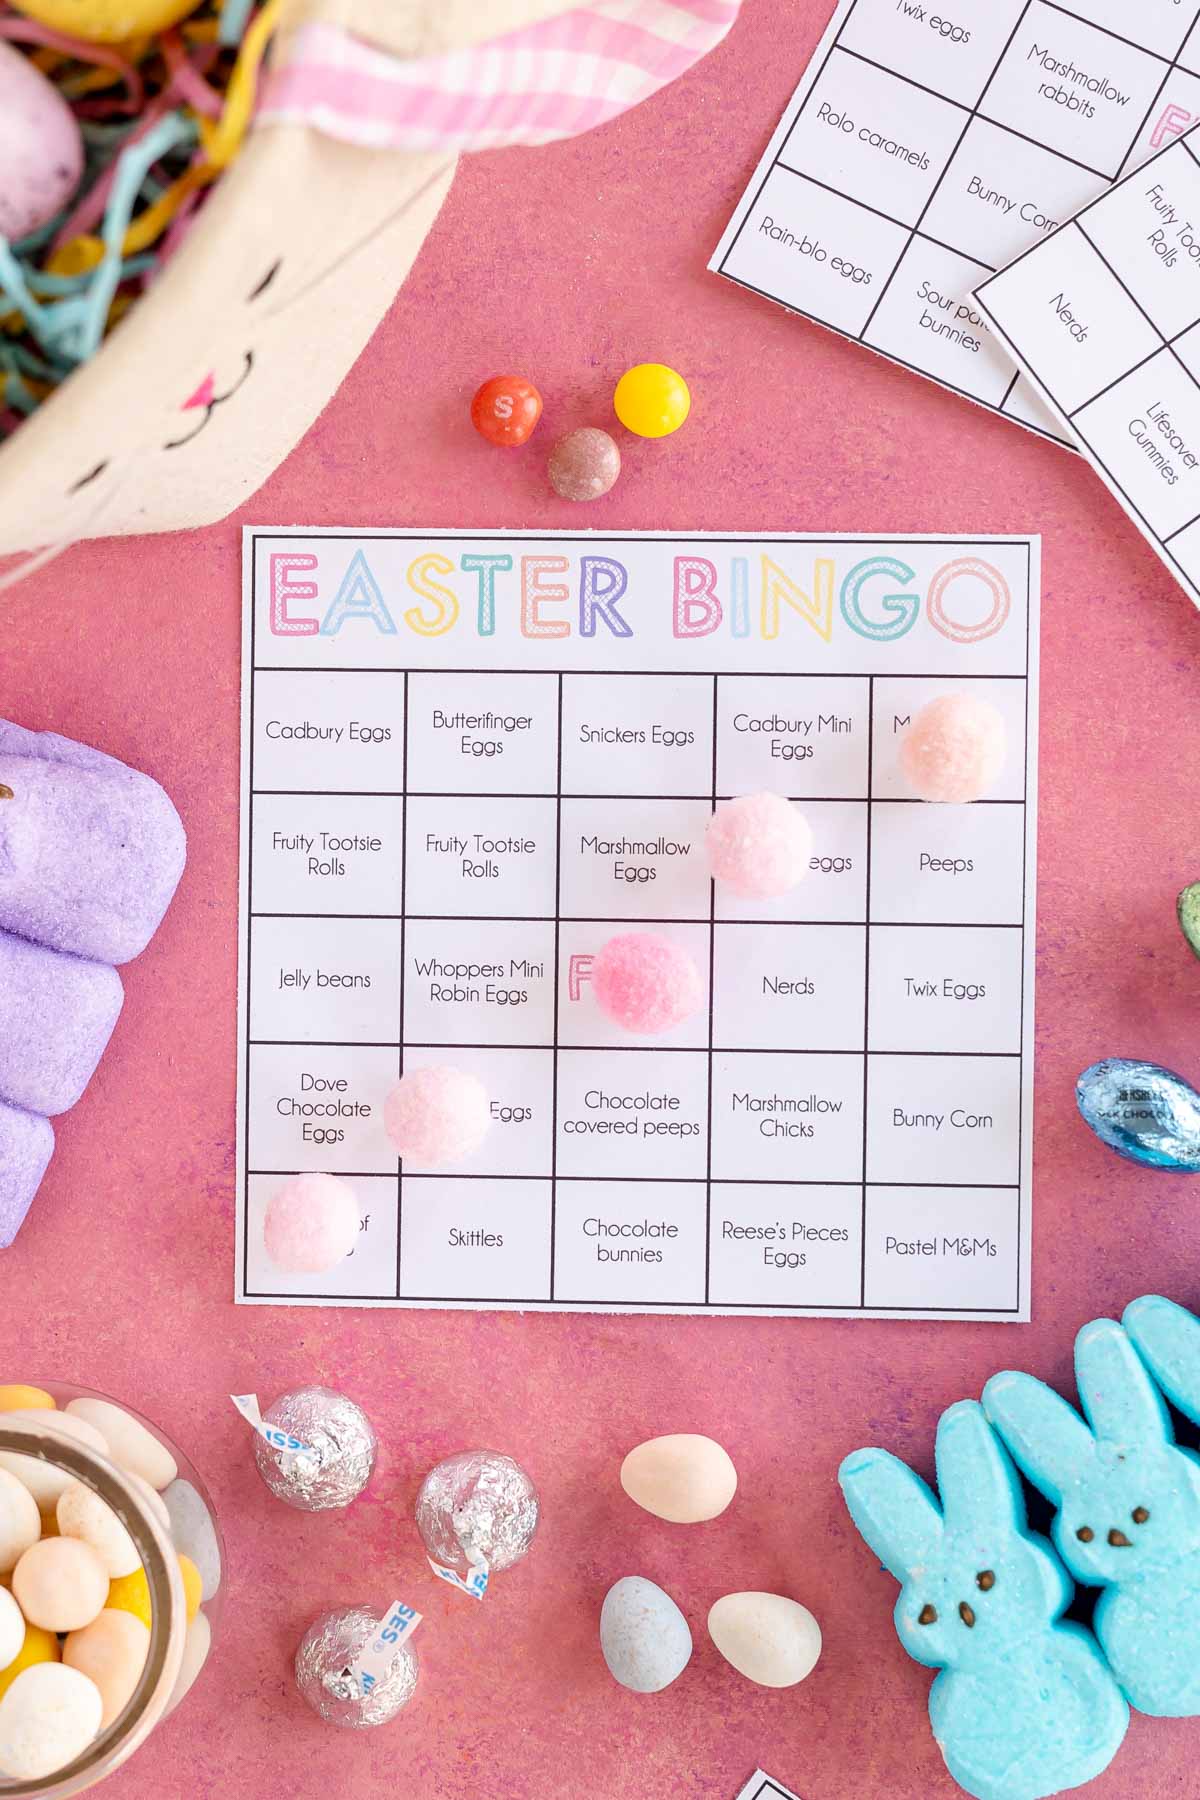 Easter candy bingo card with balls across the middle